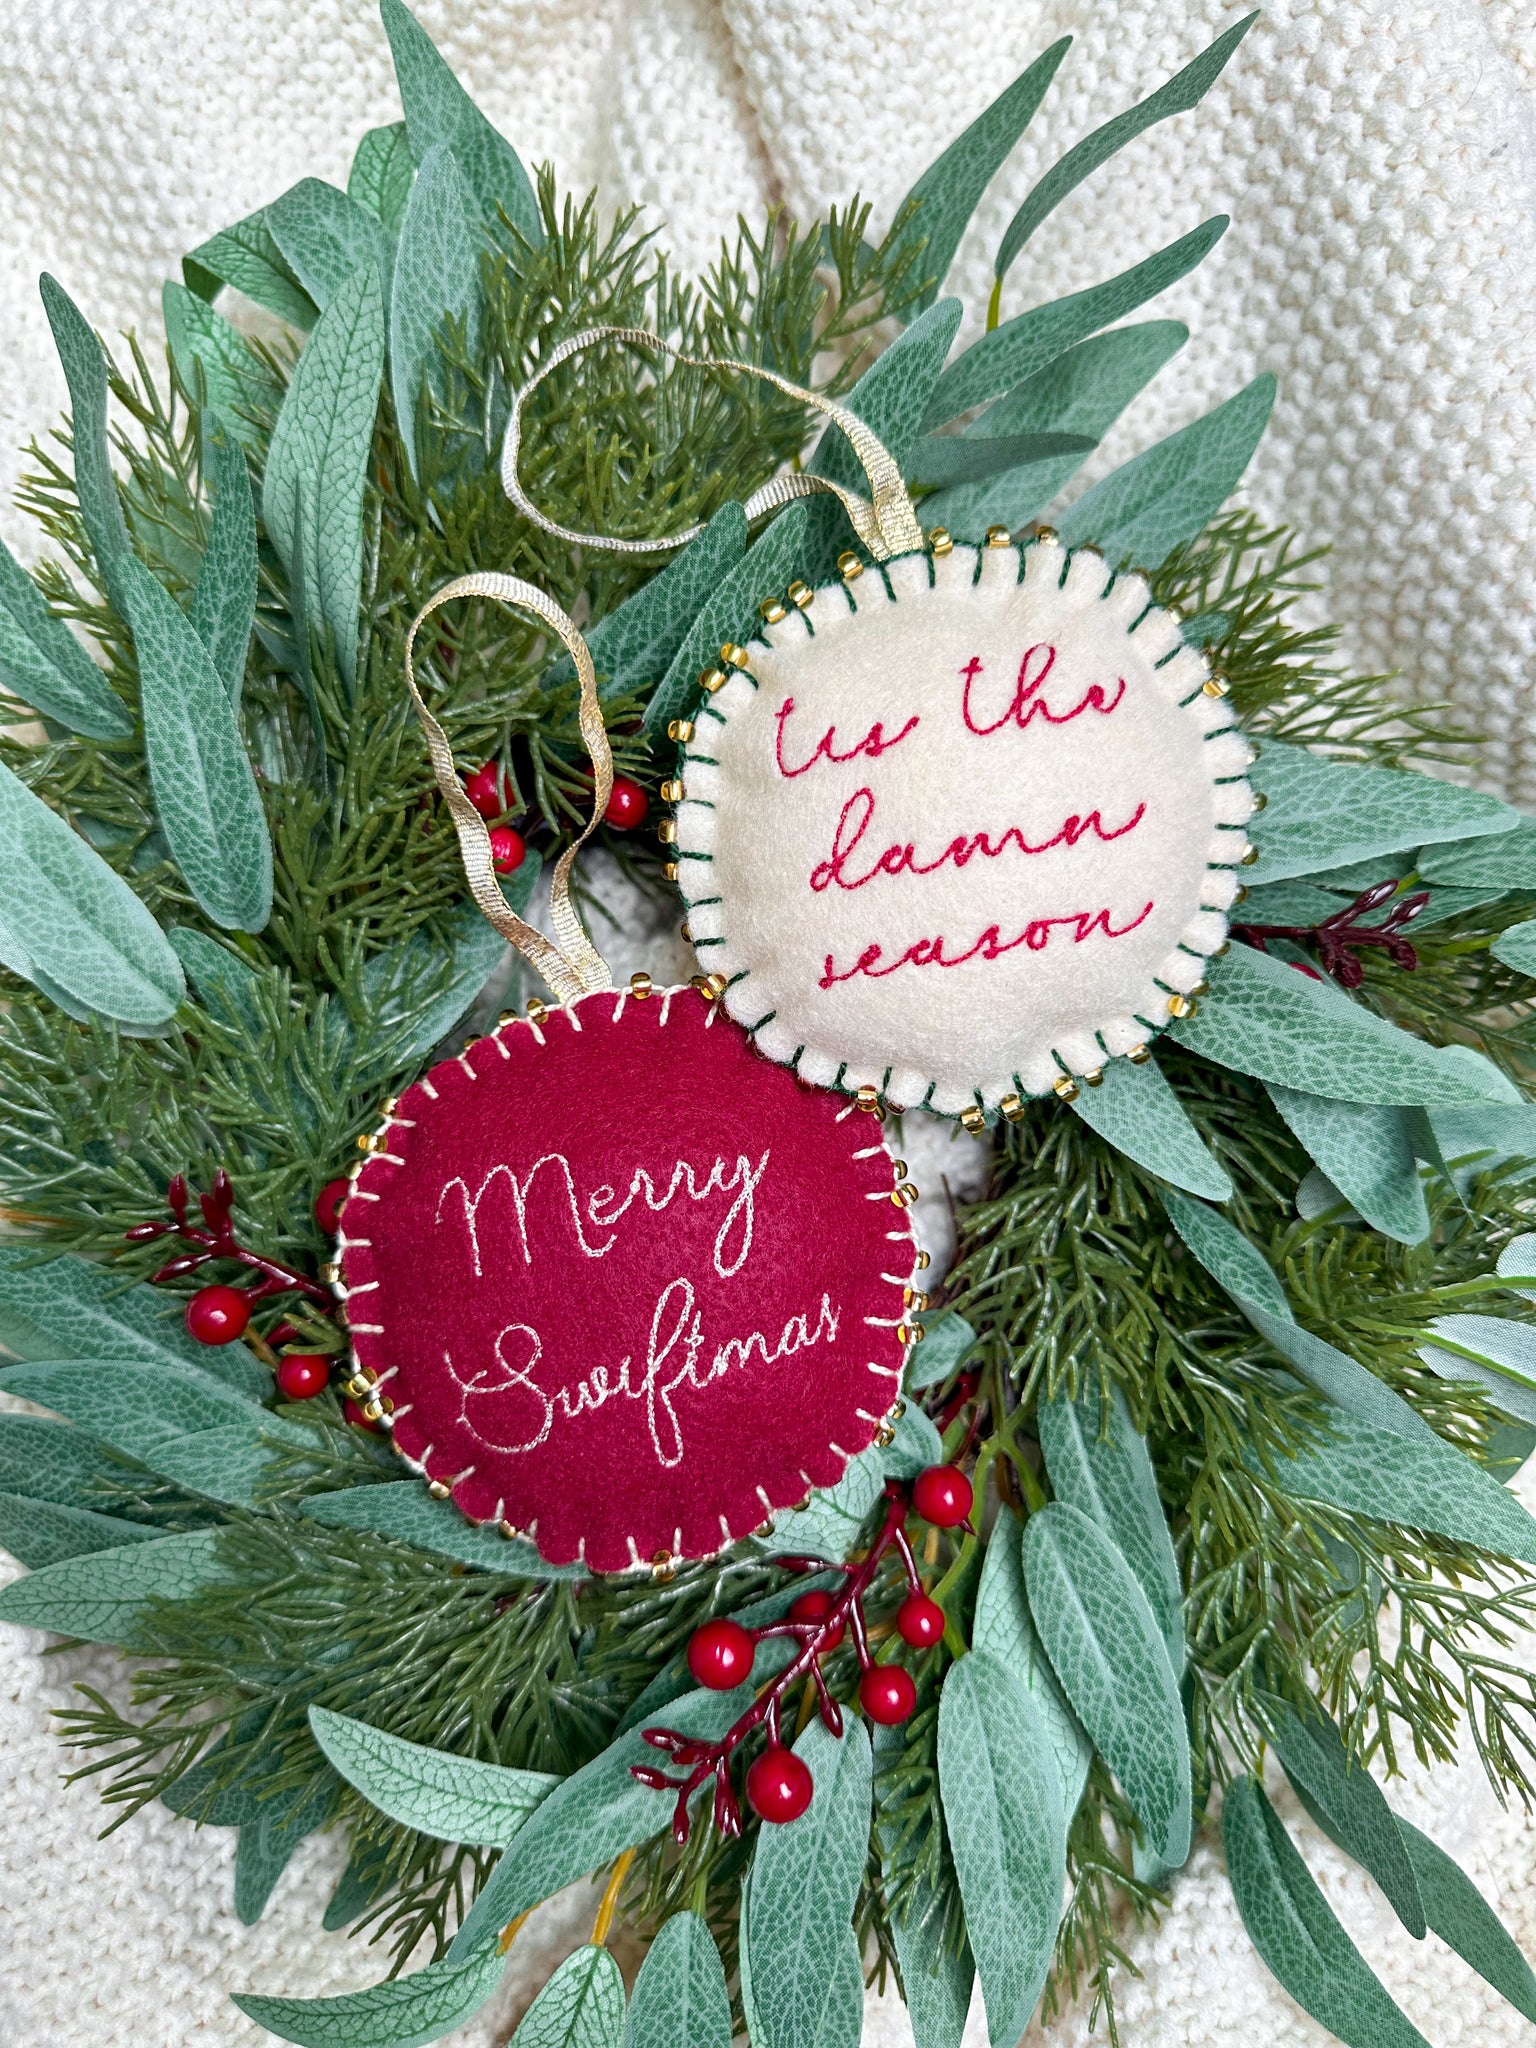 Hand Stitched 'Tis the Damn Season and Merry Swiftmas Ornaments